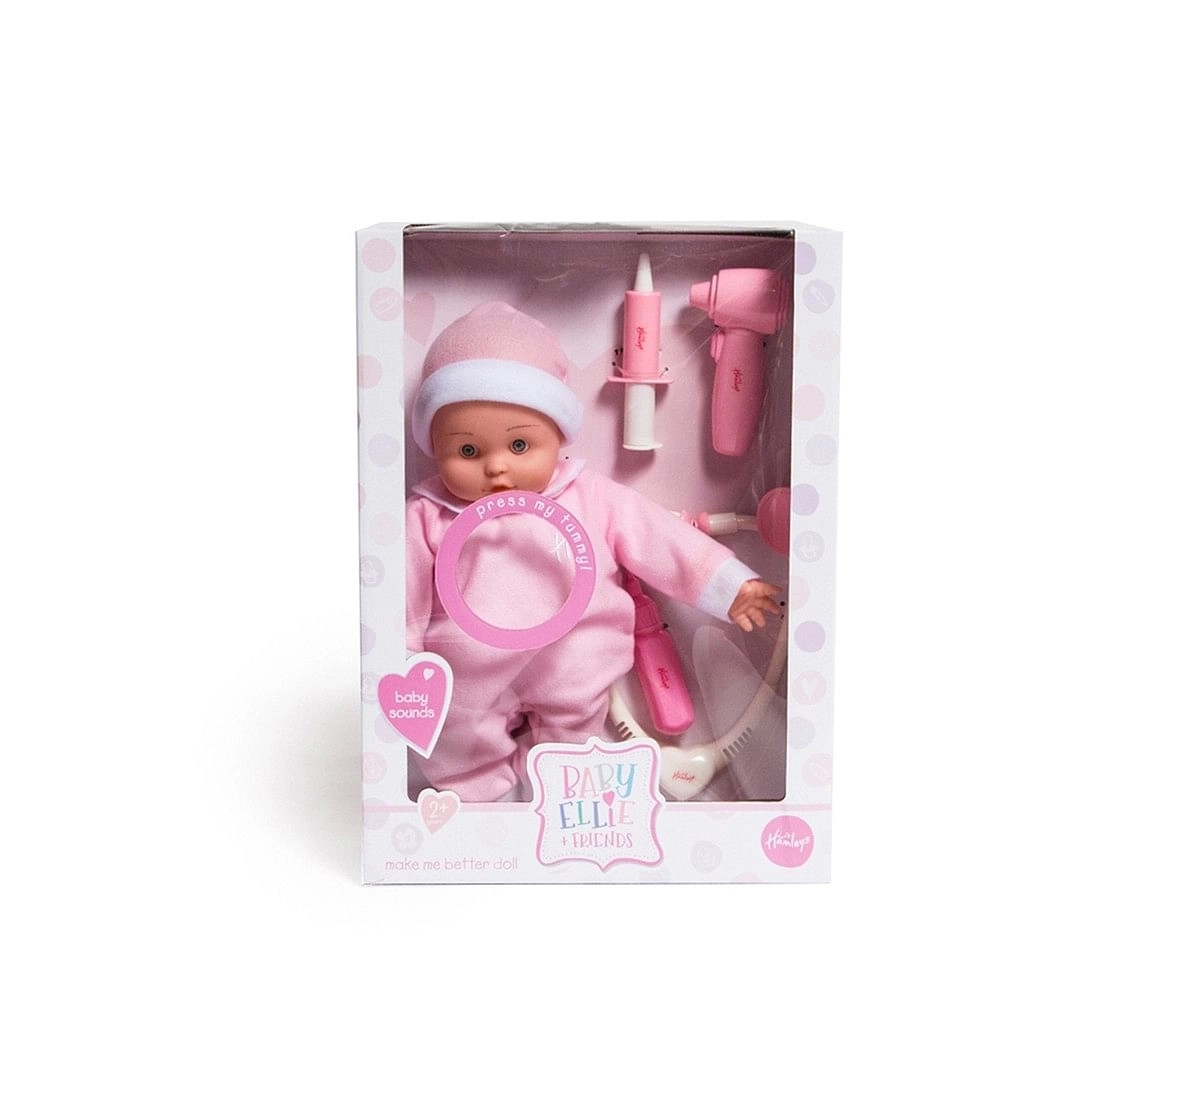 Baby Ellie  Docter Doll - Make Me Better Dolls & Accessories for Kids age 12M+ 